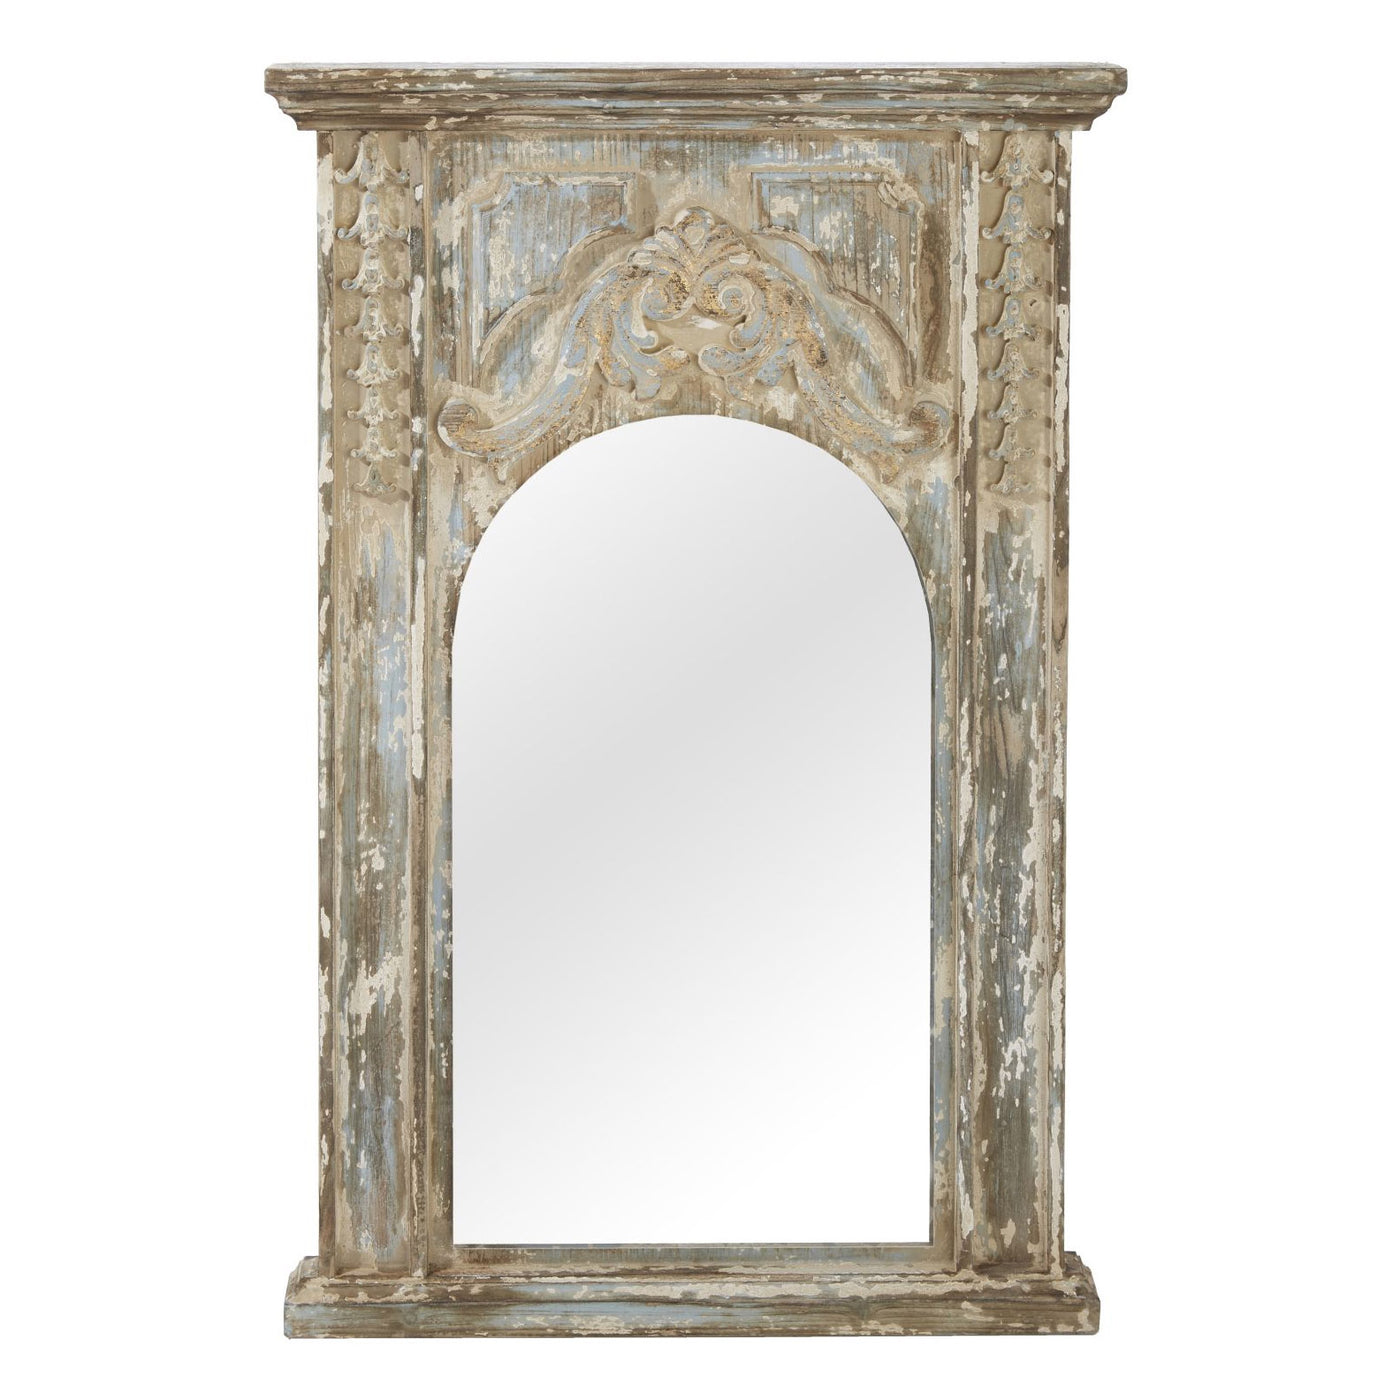 42" Curtis Weathered Wall Mirror